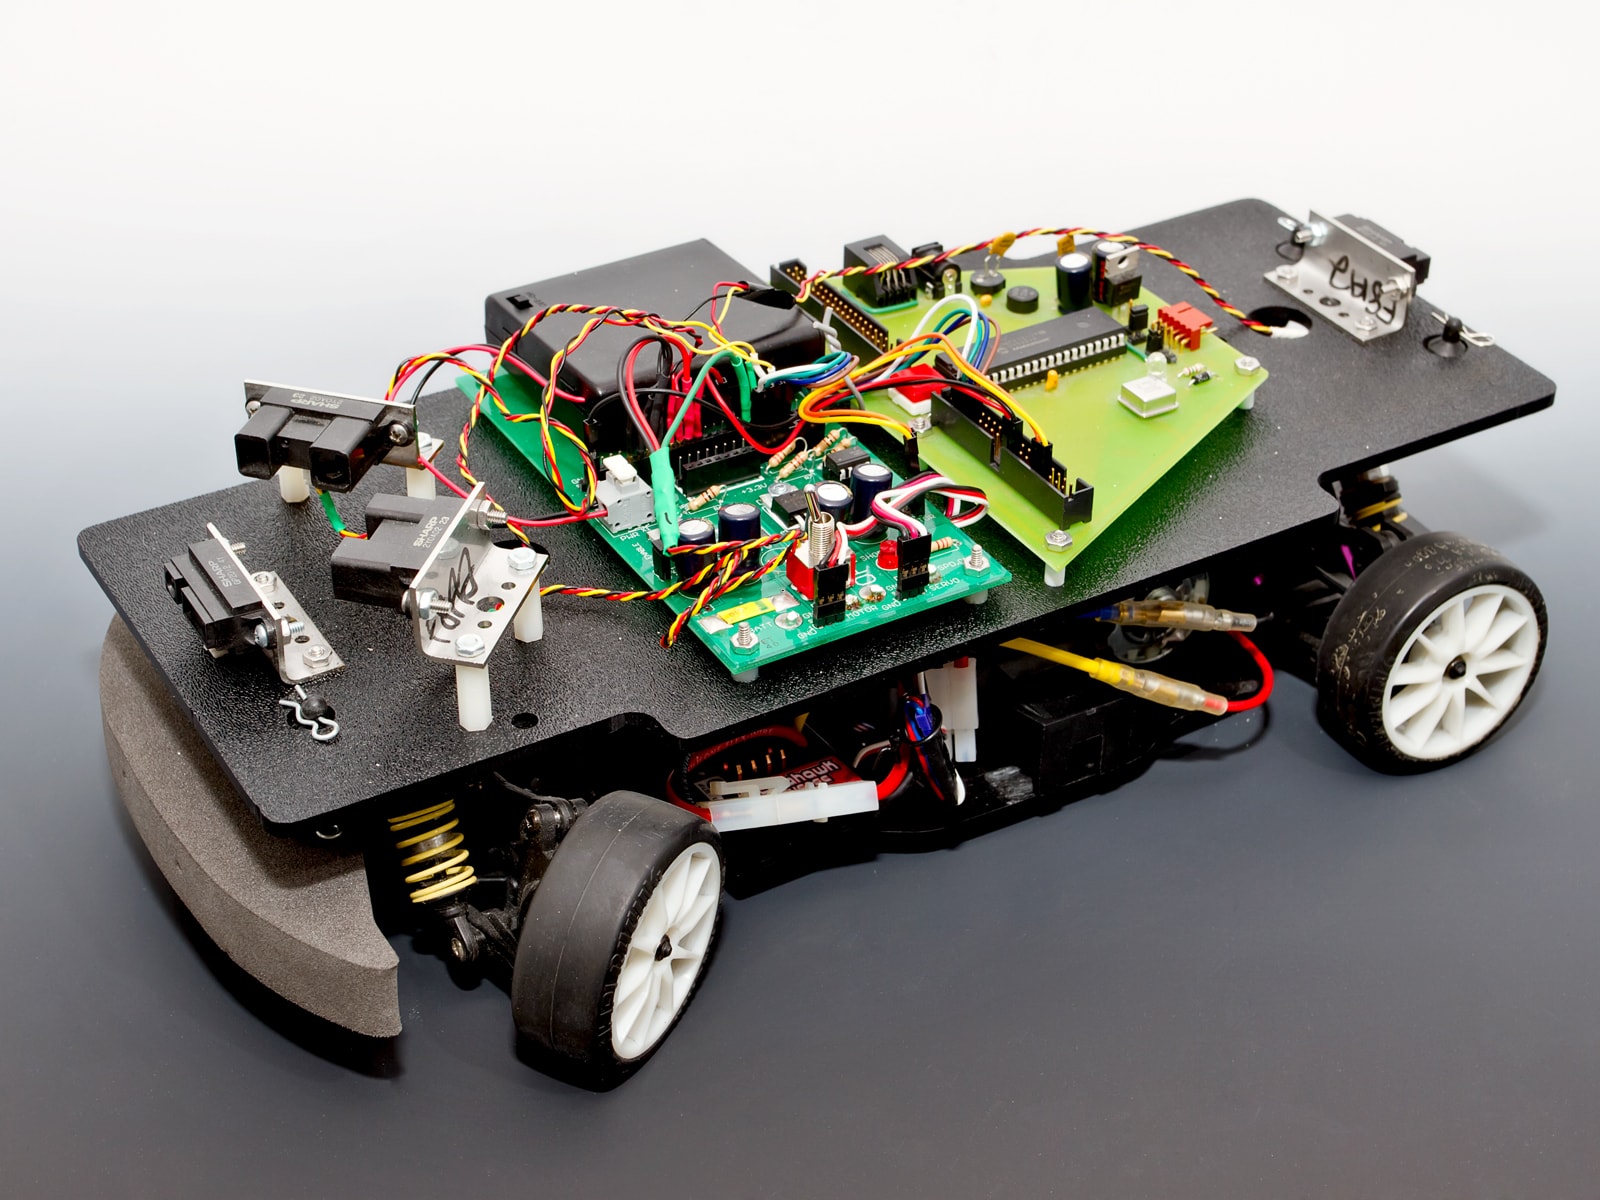 A four wheeled car with infrared sensors and exposed circuitry.